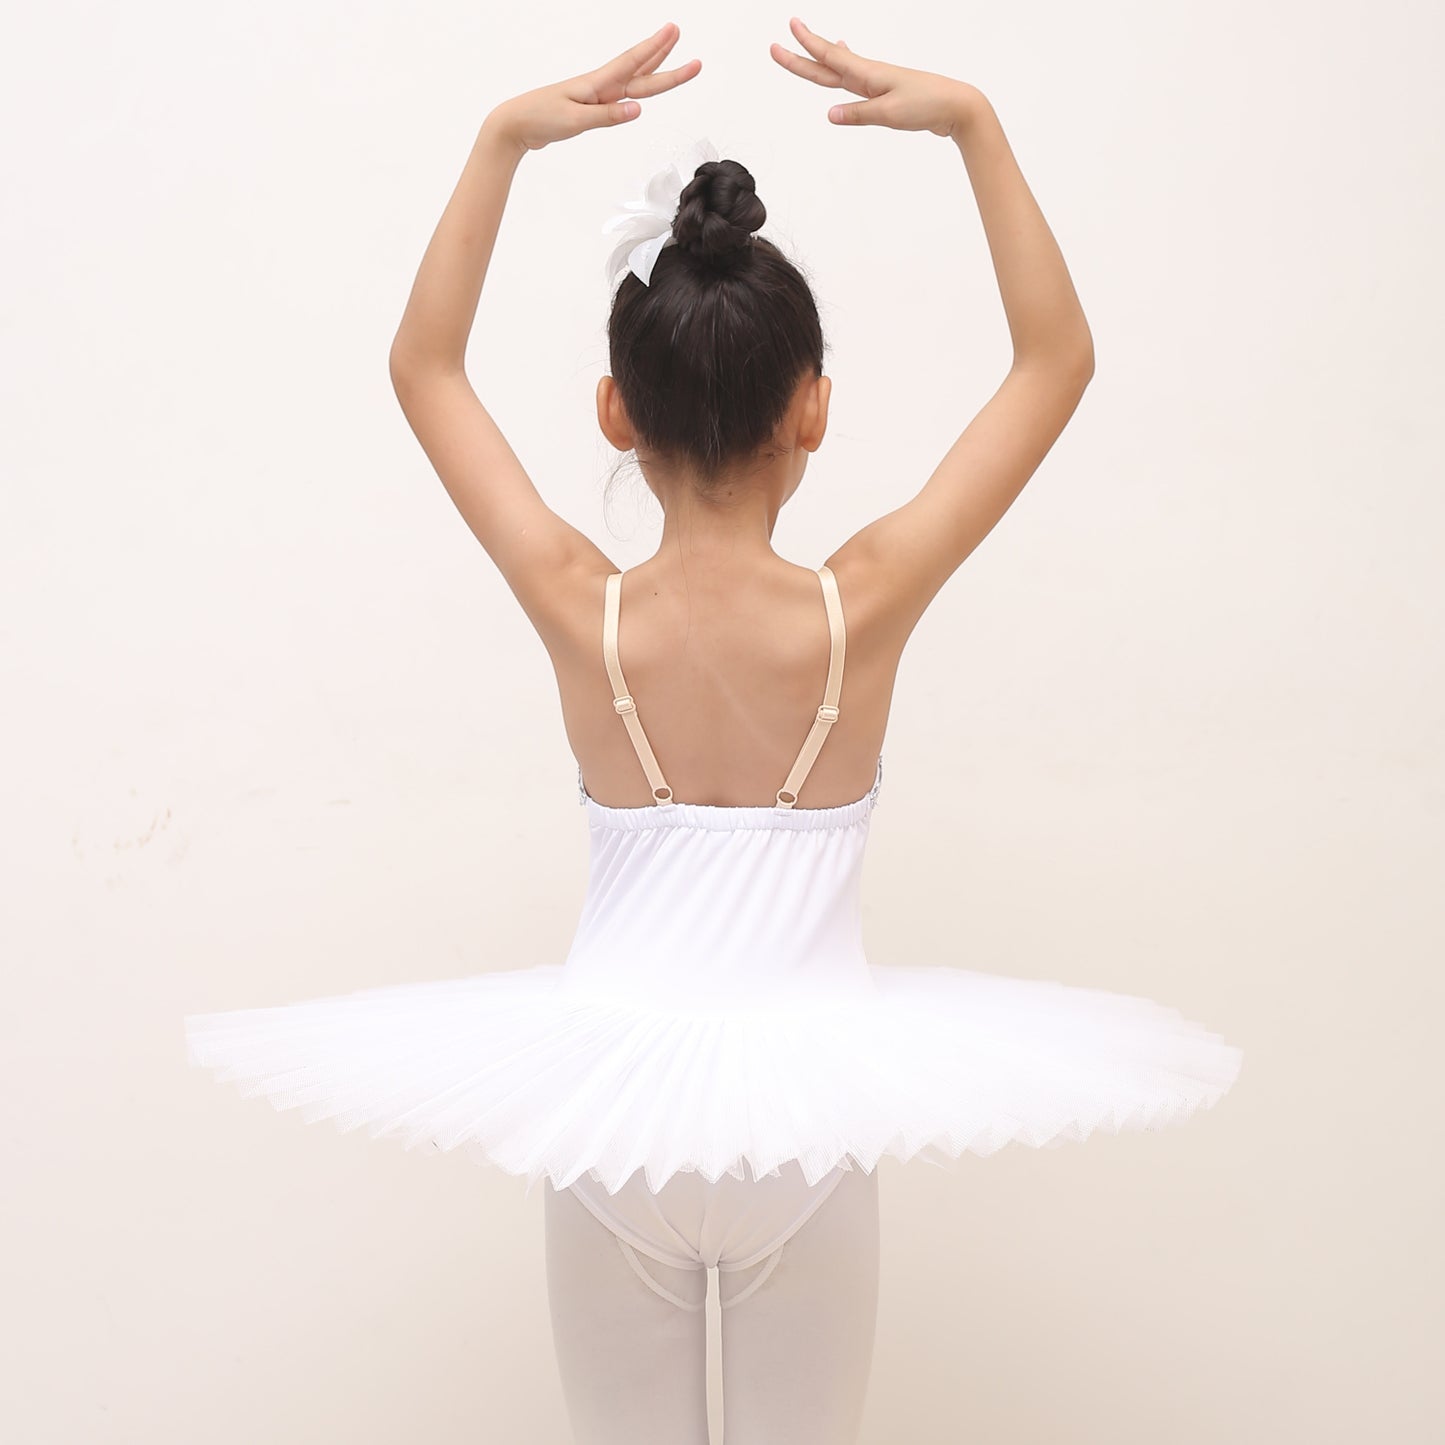 Load image into Gallery viewer, Stiff Ballet Tutu Skirt Swan Lake Costume Young Girls Stage Professional Dance Wear
